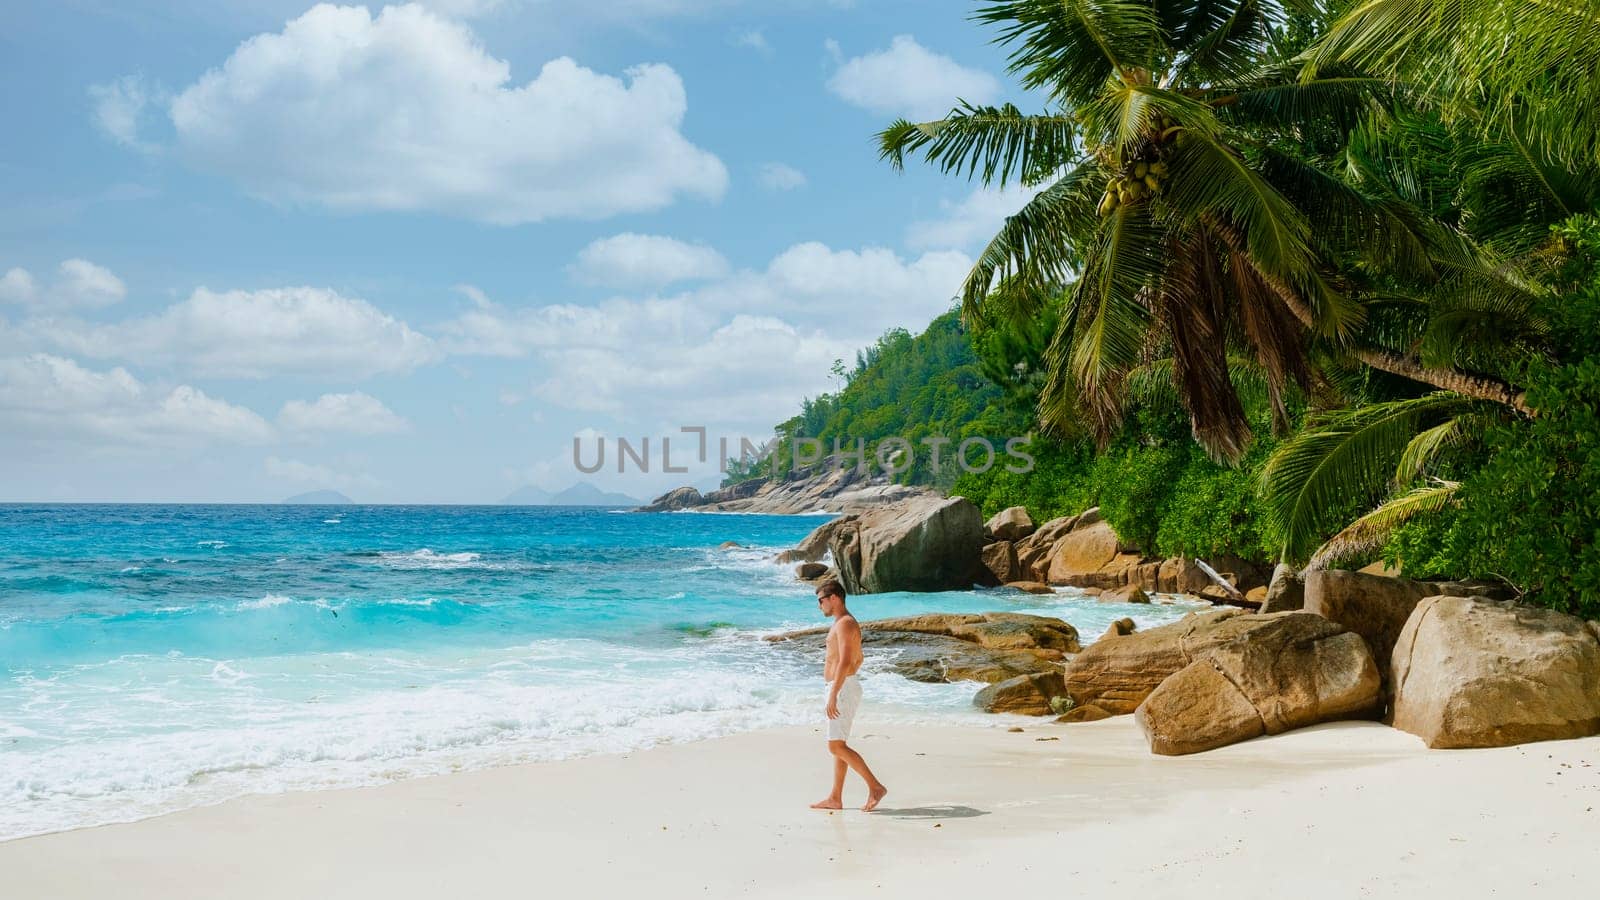 Young men in a swim short on a white tropical beach with palm trees Petite Anse beach Mahe Tropical Seychelles Islands.